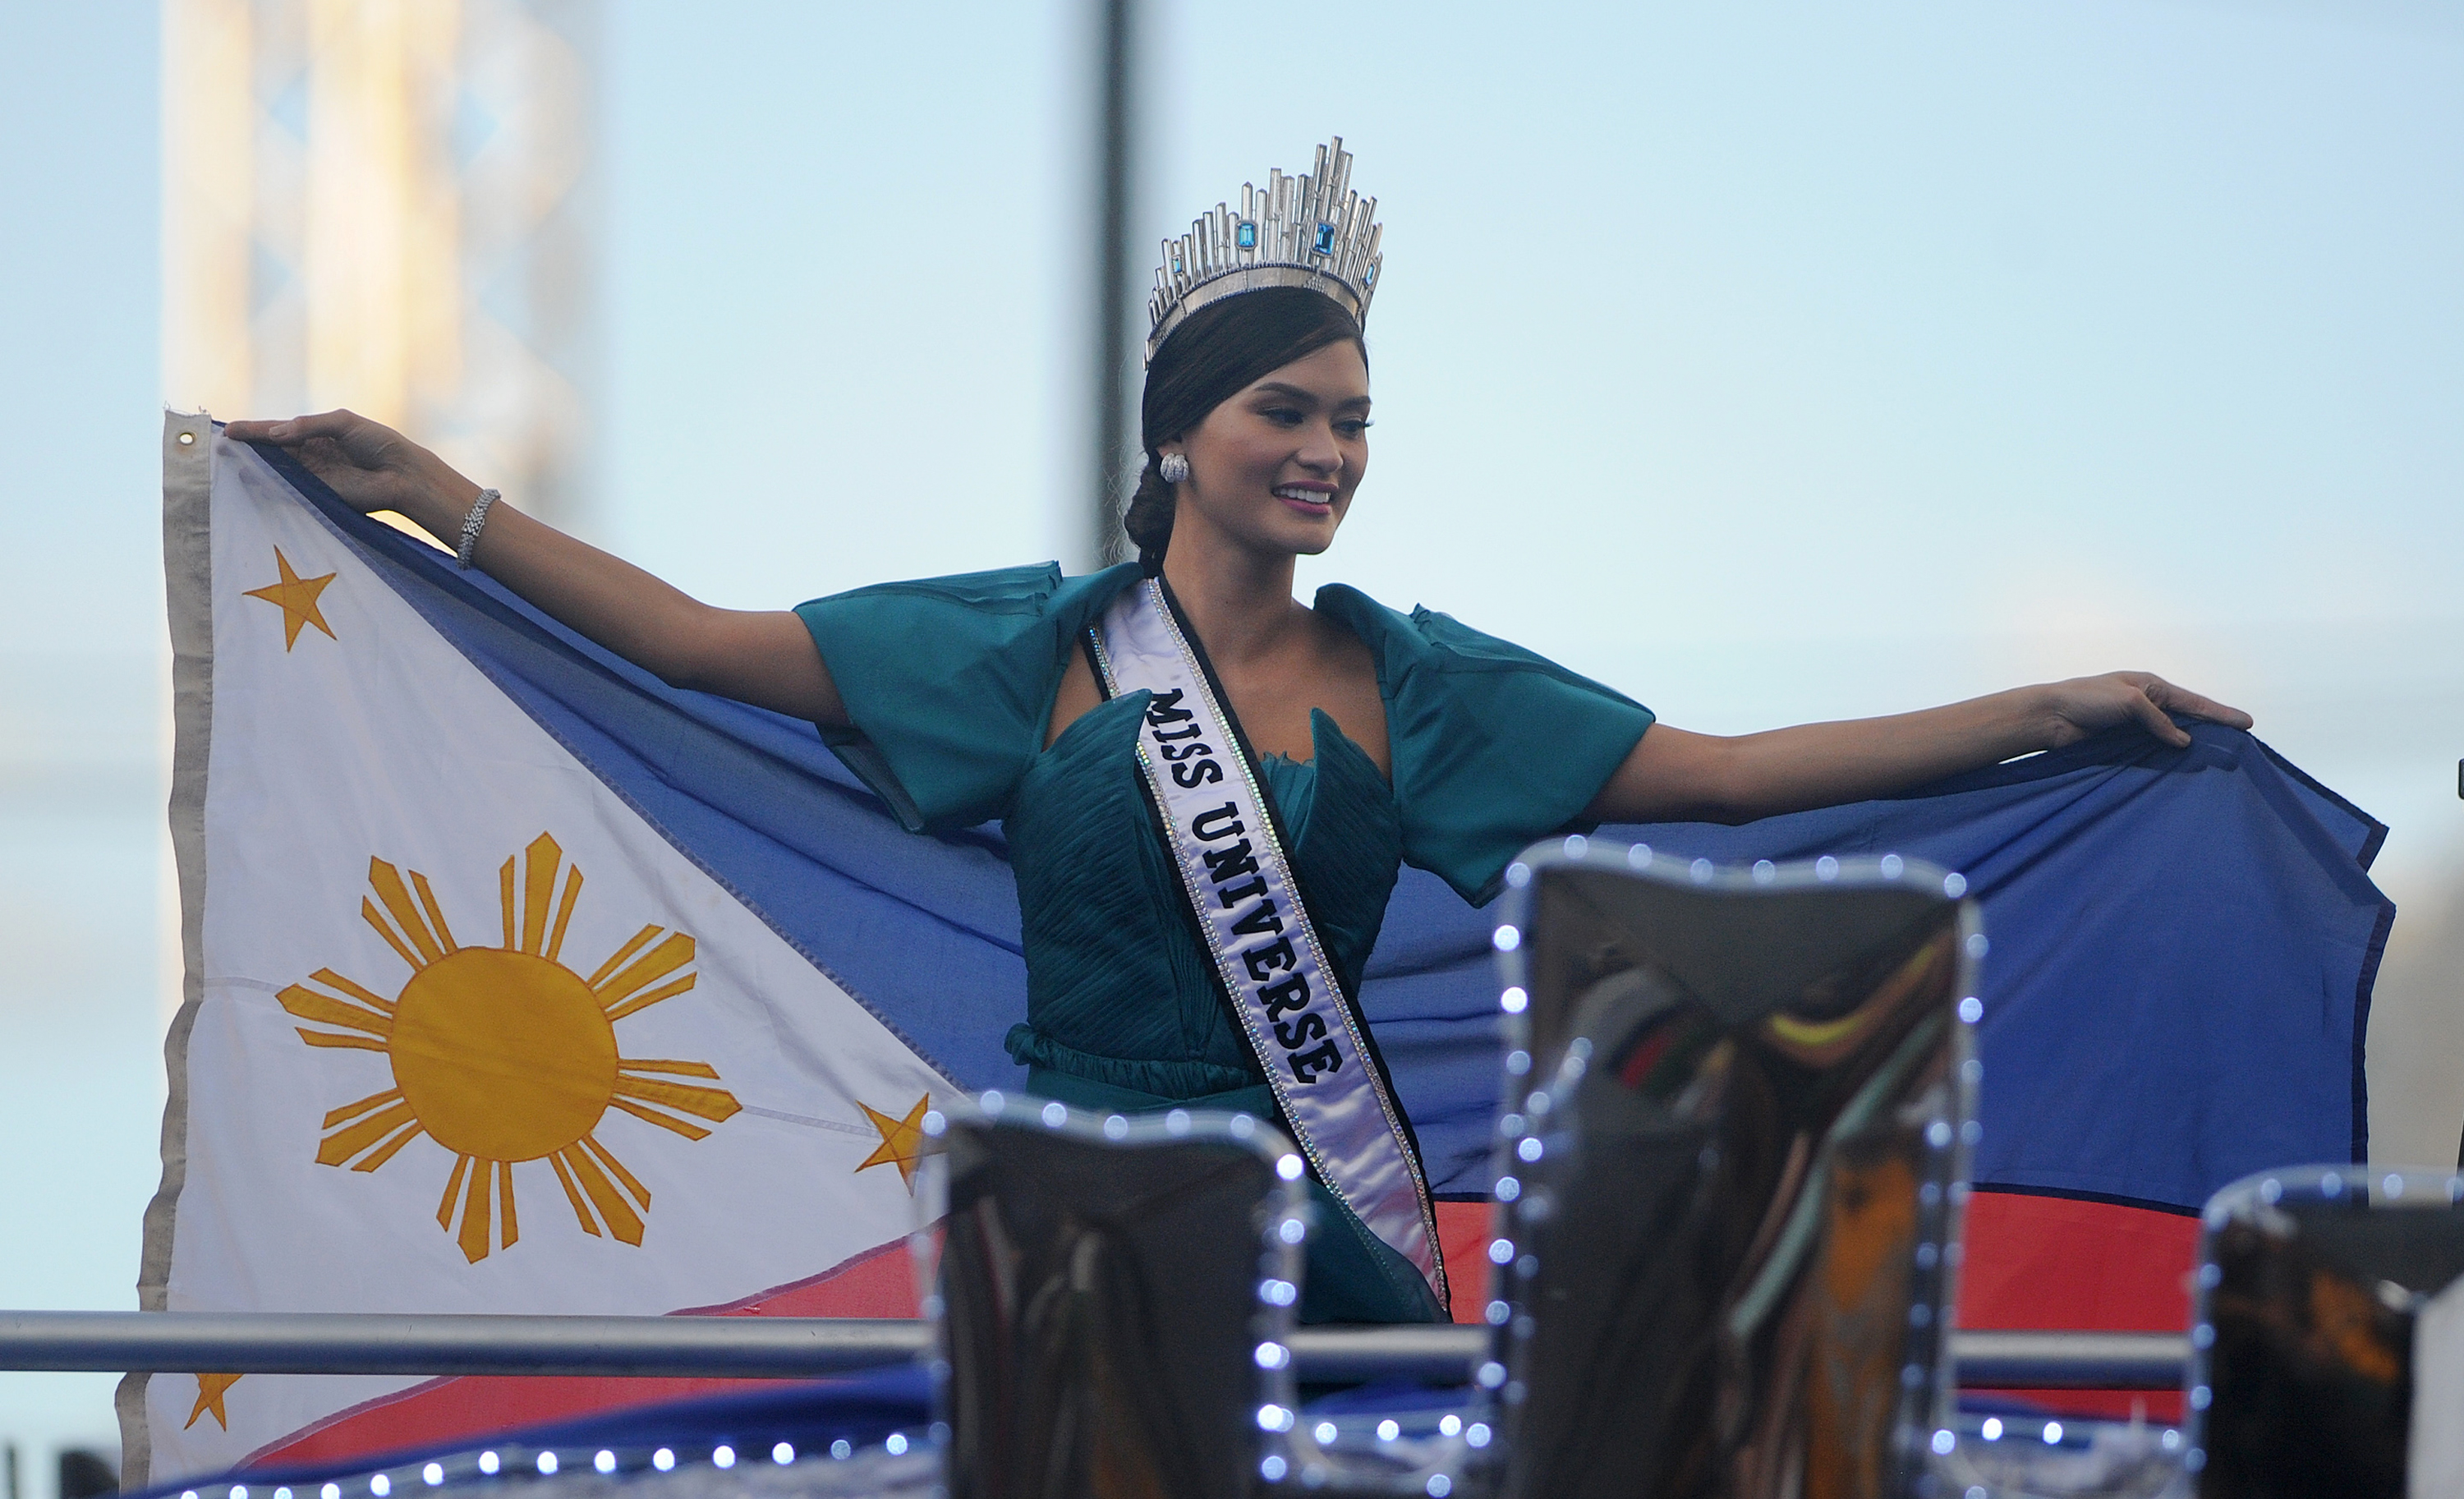 Miss Universe Pia Alonzo Wurtzbach waves a Philippine flag during her victory homecoming parade in Manila on January 25, 2016. Wurtzbach was crowned Miss Universe in December in a drama-filled show after the pageant's host, comedian Steve Harvey, misread his cue card and initially announced Miss Colombia as the winner before apologizing and saying Wurtzbach had won.     AFP PHOTO / NOEL CELIS / AFP / NOEL CELIS